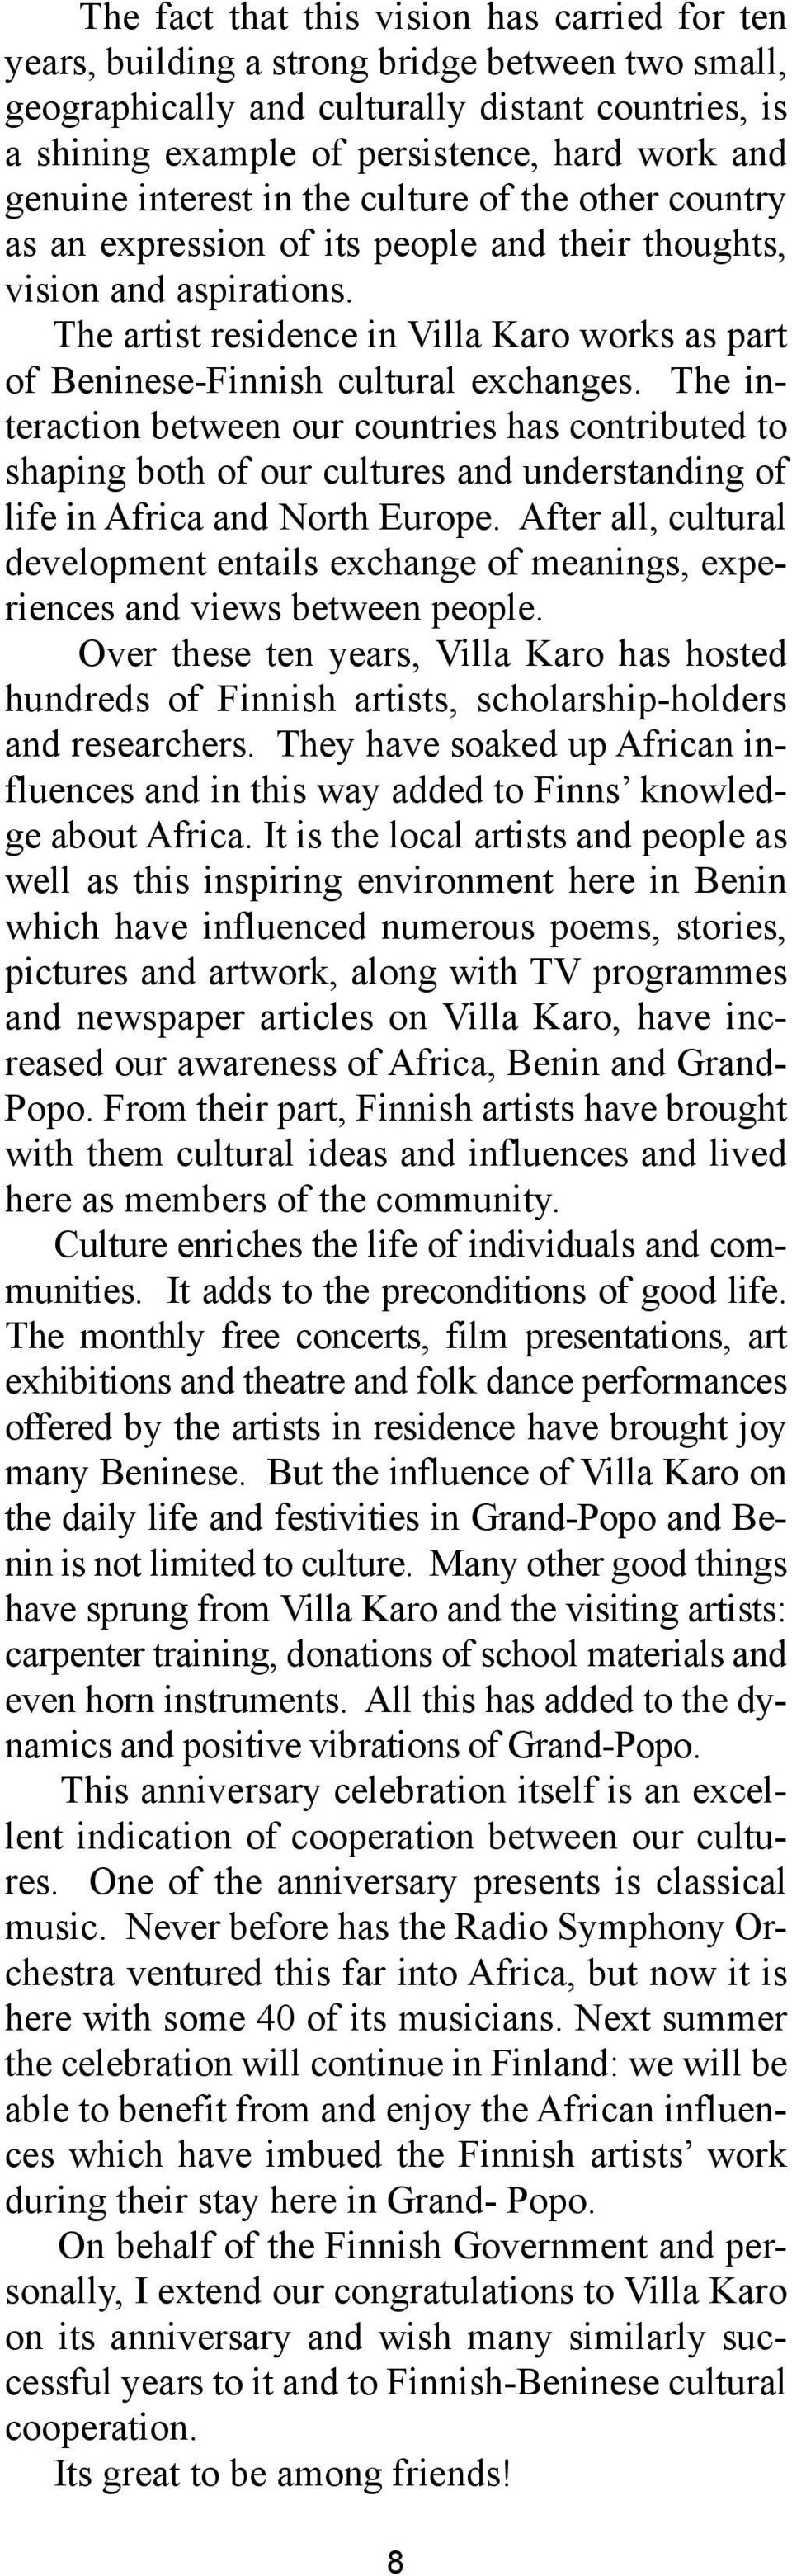 The artist residence in Villa Karo works as part of Beninese-Finnish cultural exchanges.